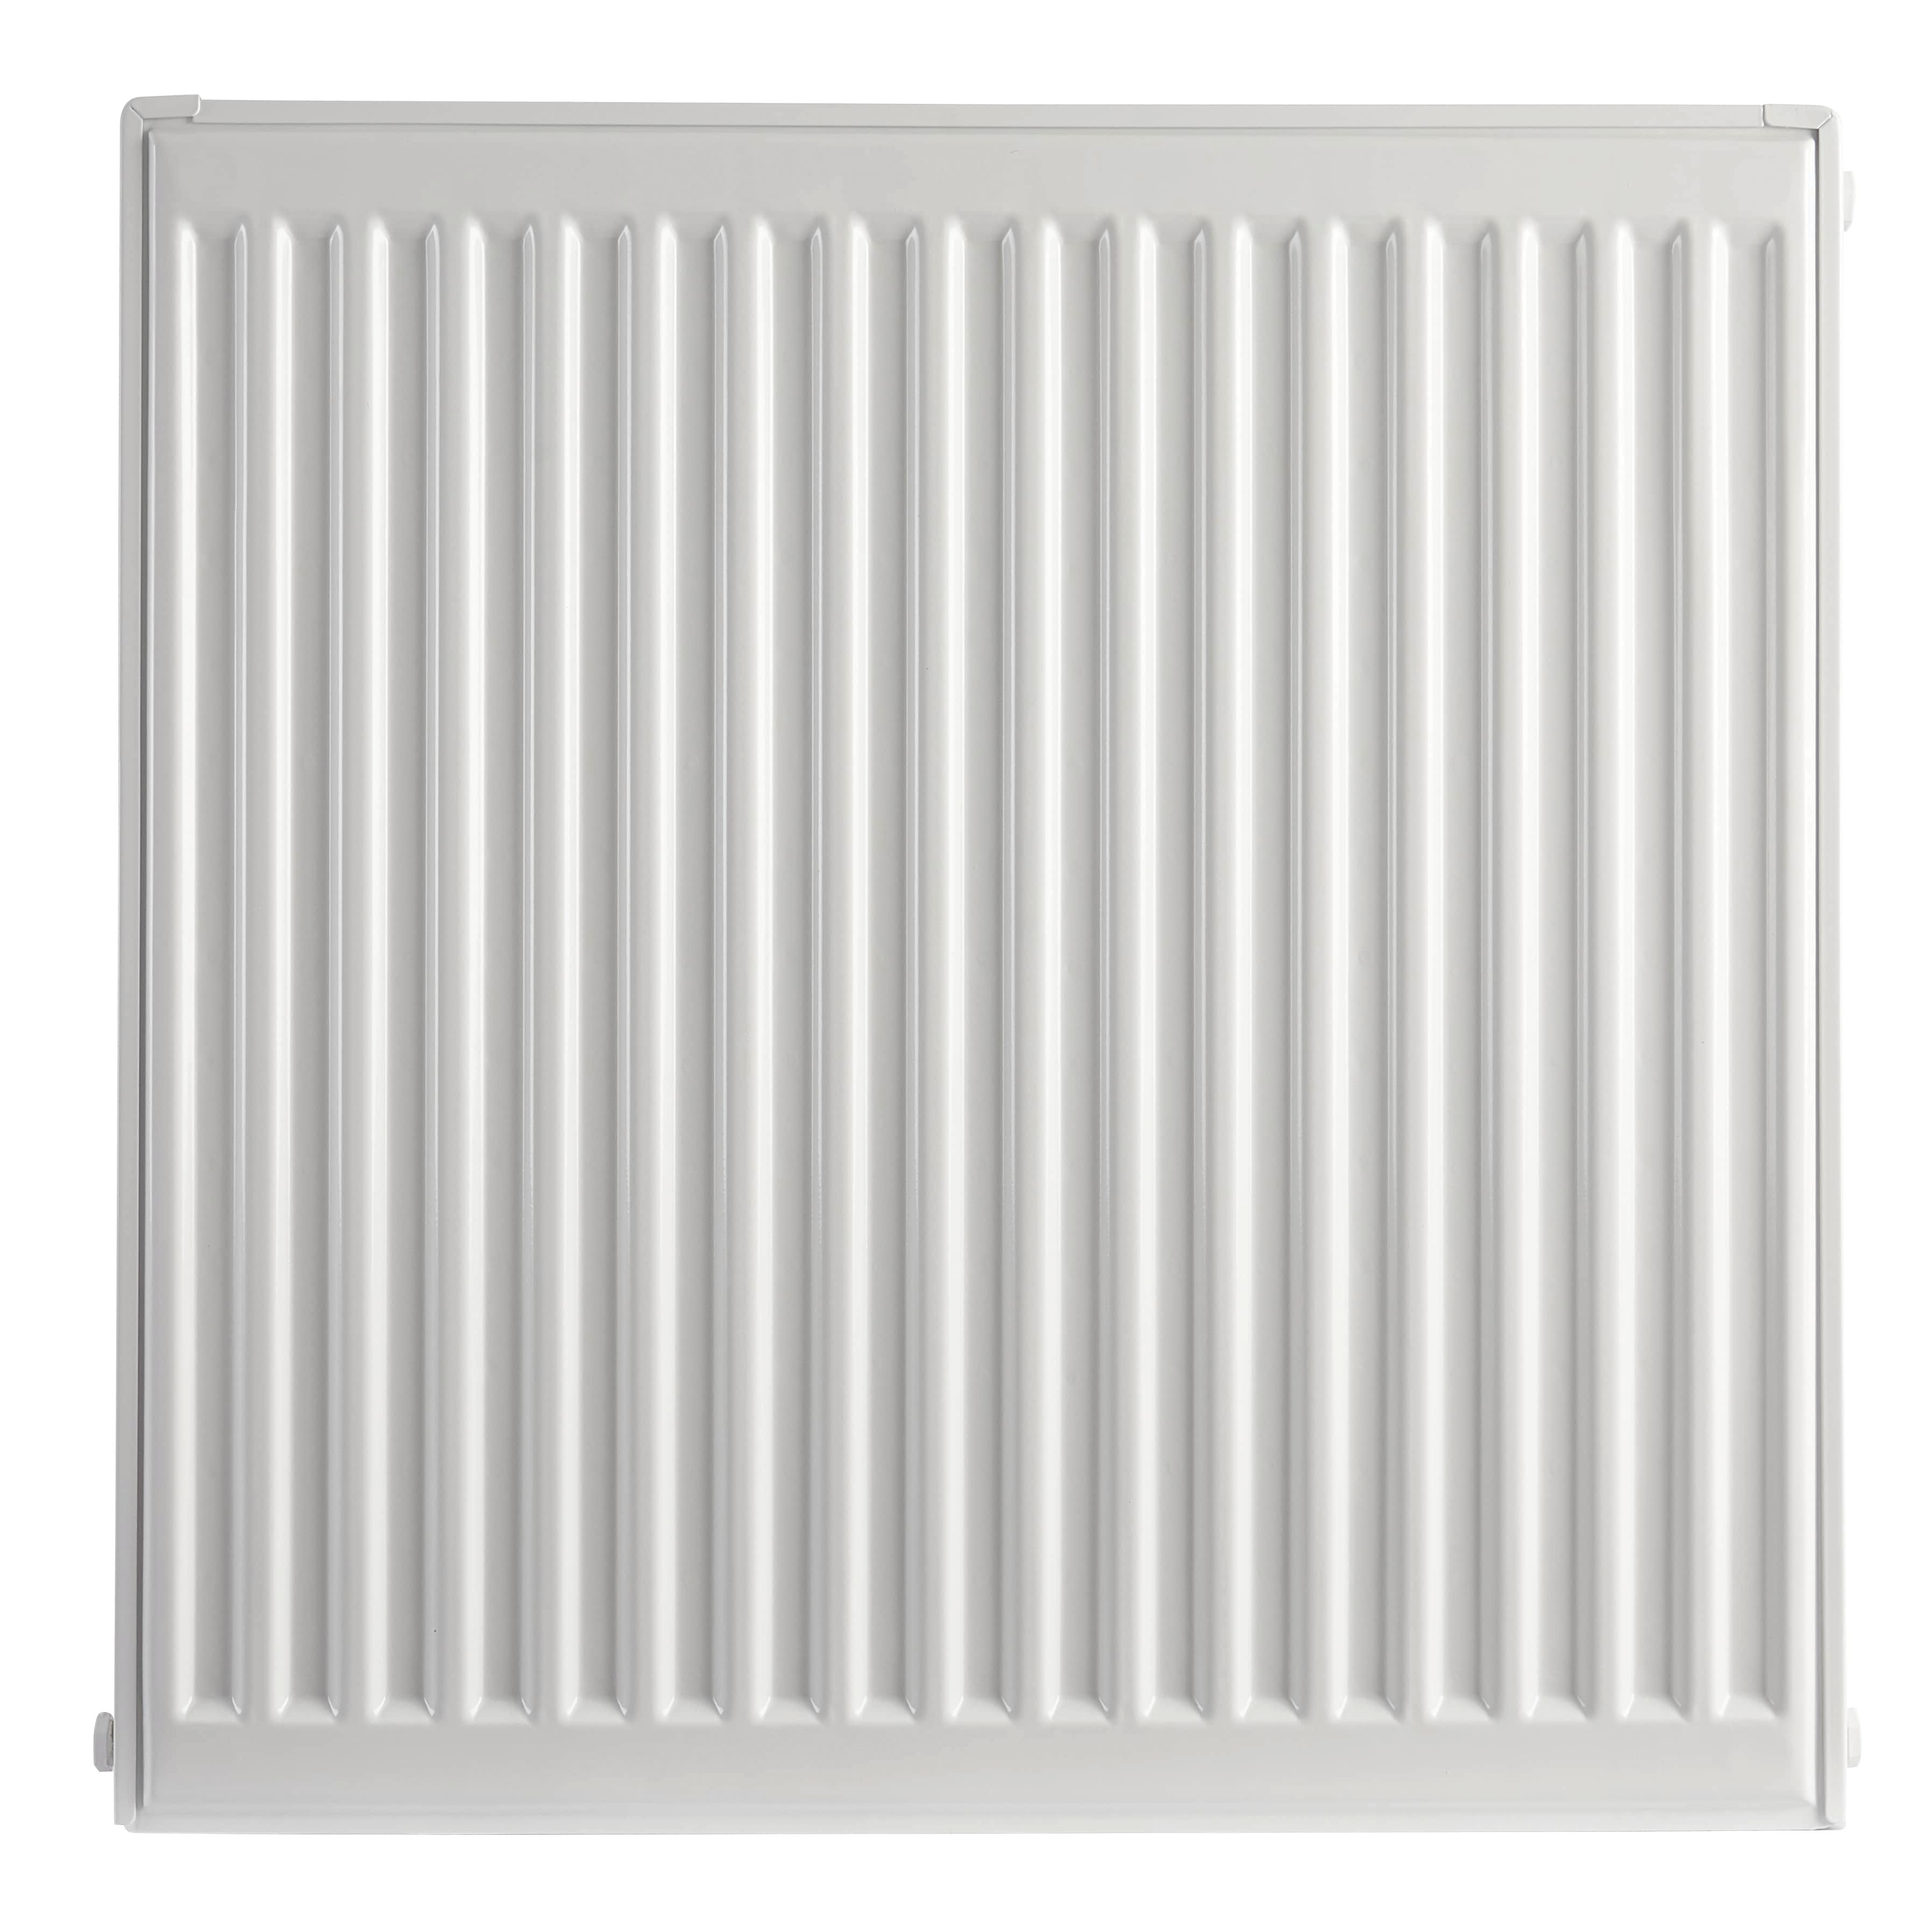 Image of Homeline by Stelrad 600 x 400mm Type 22 Double Panel Premium Double Convector Radiator